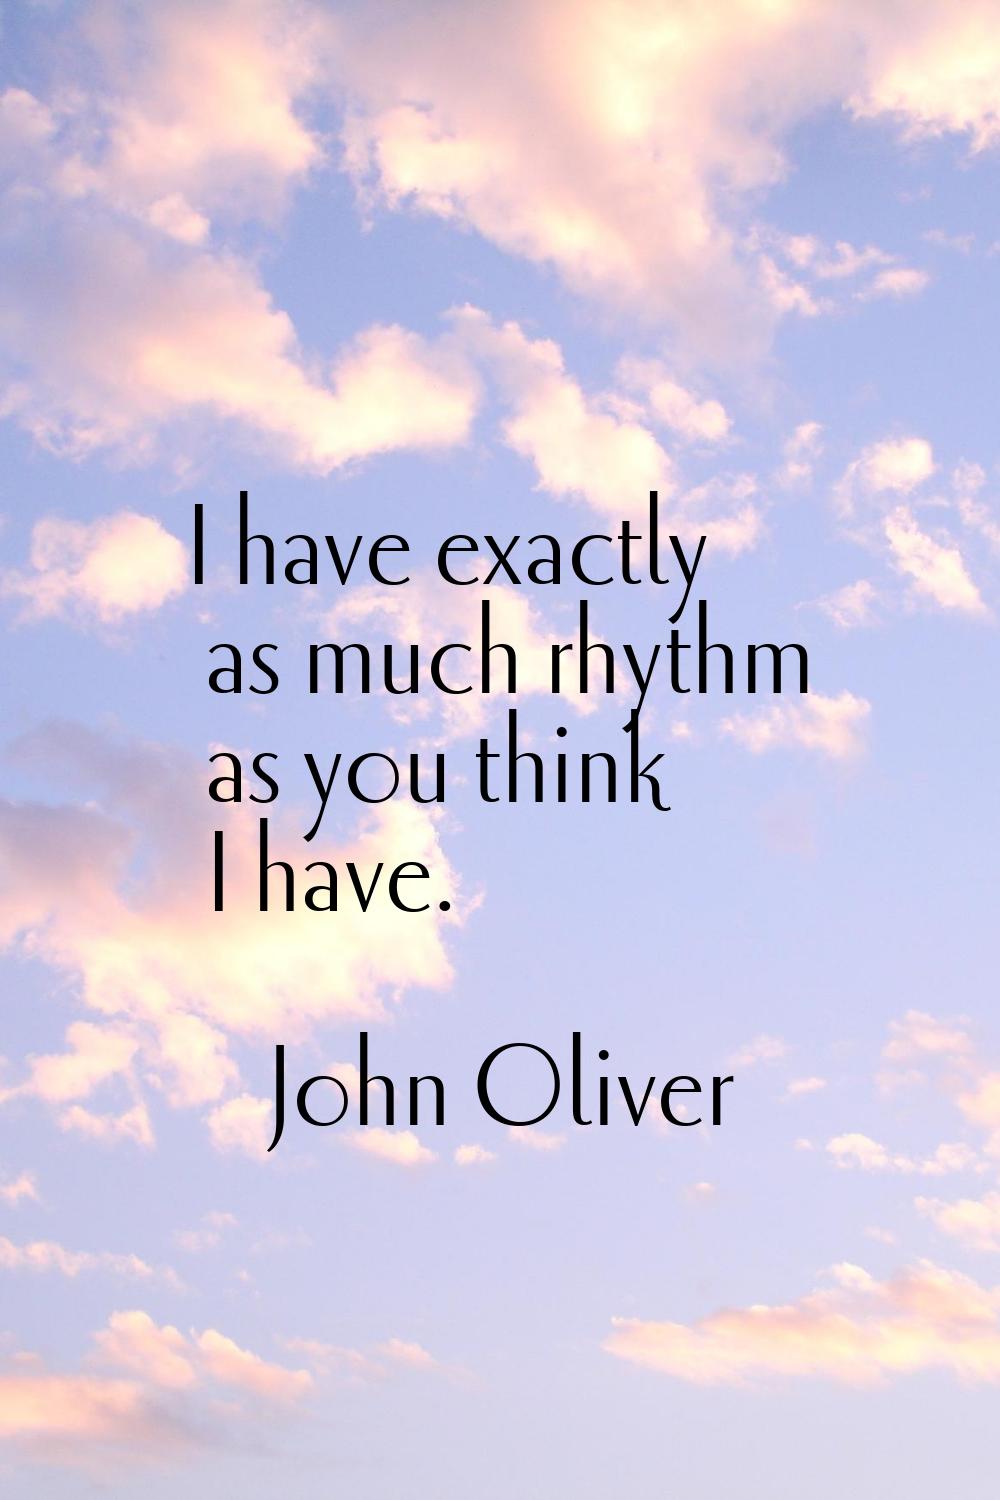 I have exactly as much rhythm as you think I have.